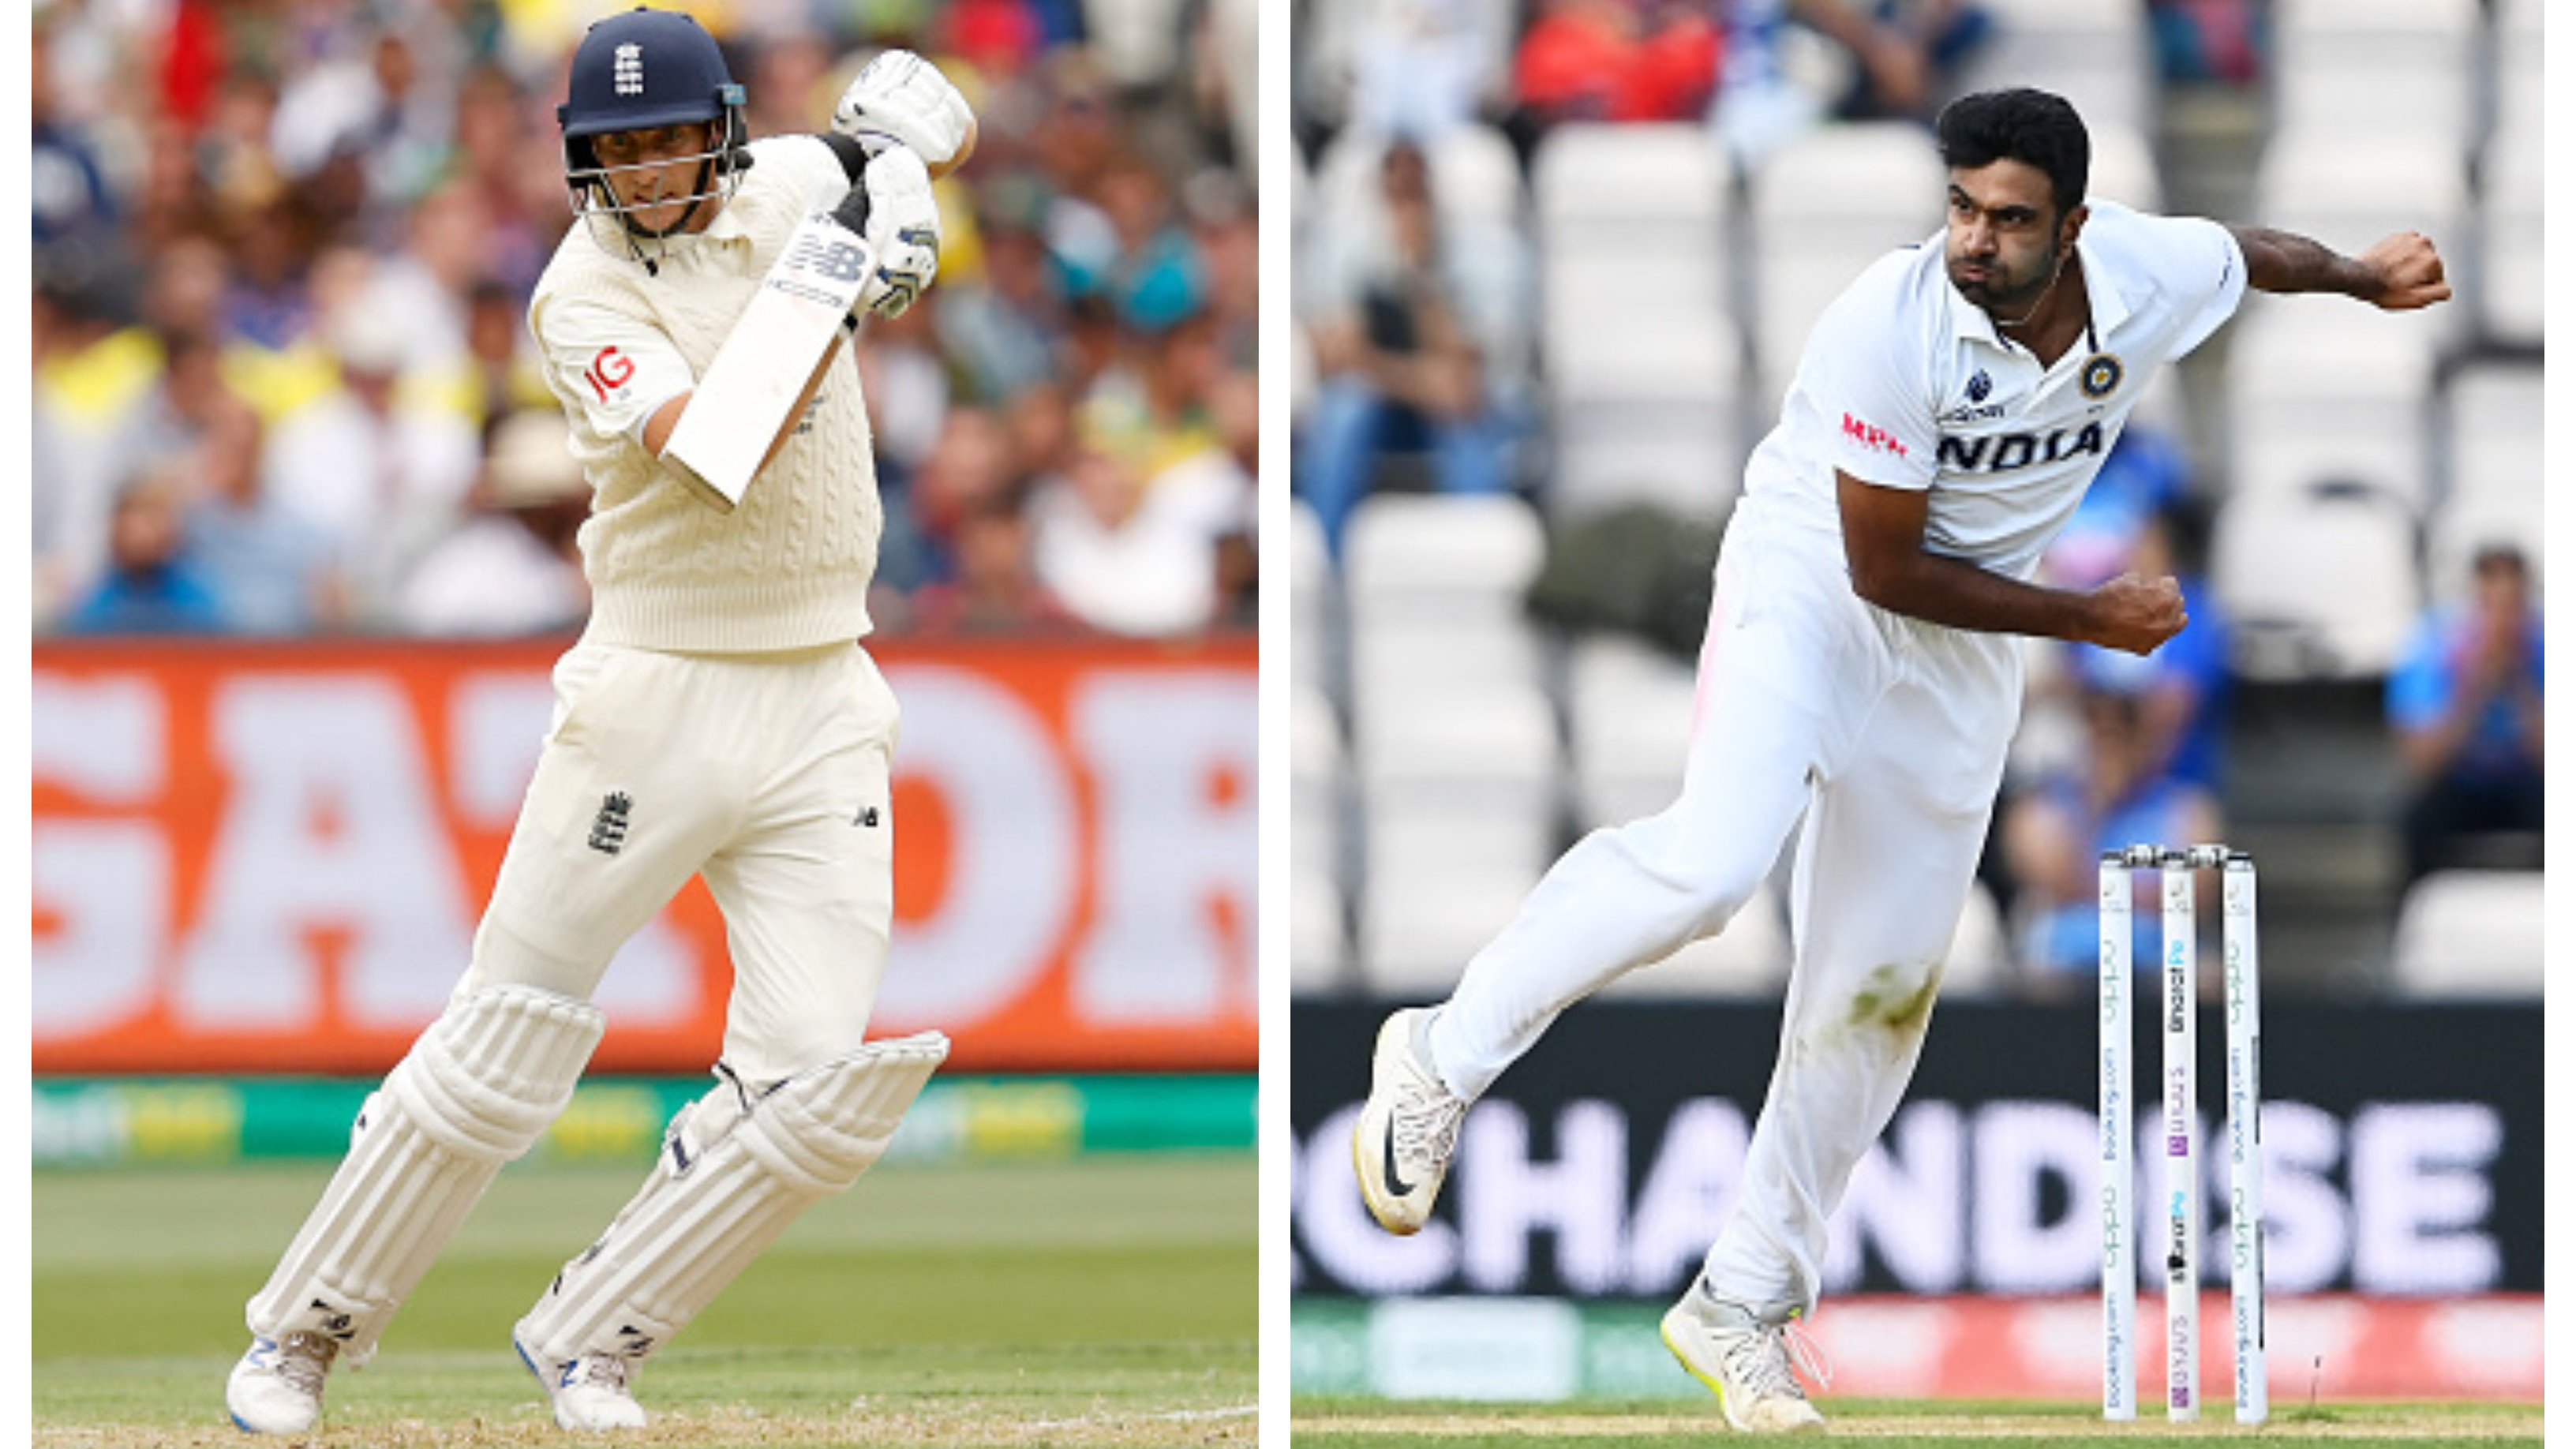 Joe Root, R Ashwin among four players nominated for ICC Men’s Test Cricketer of the Year